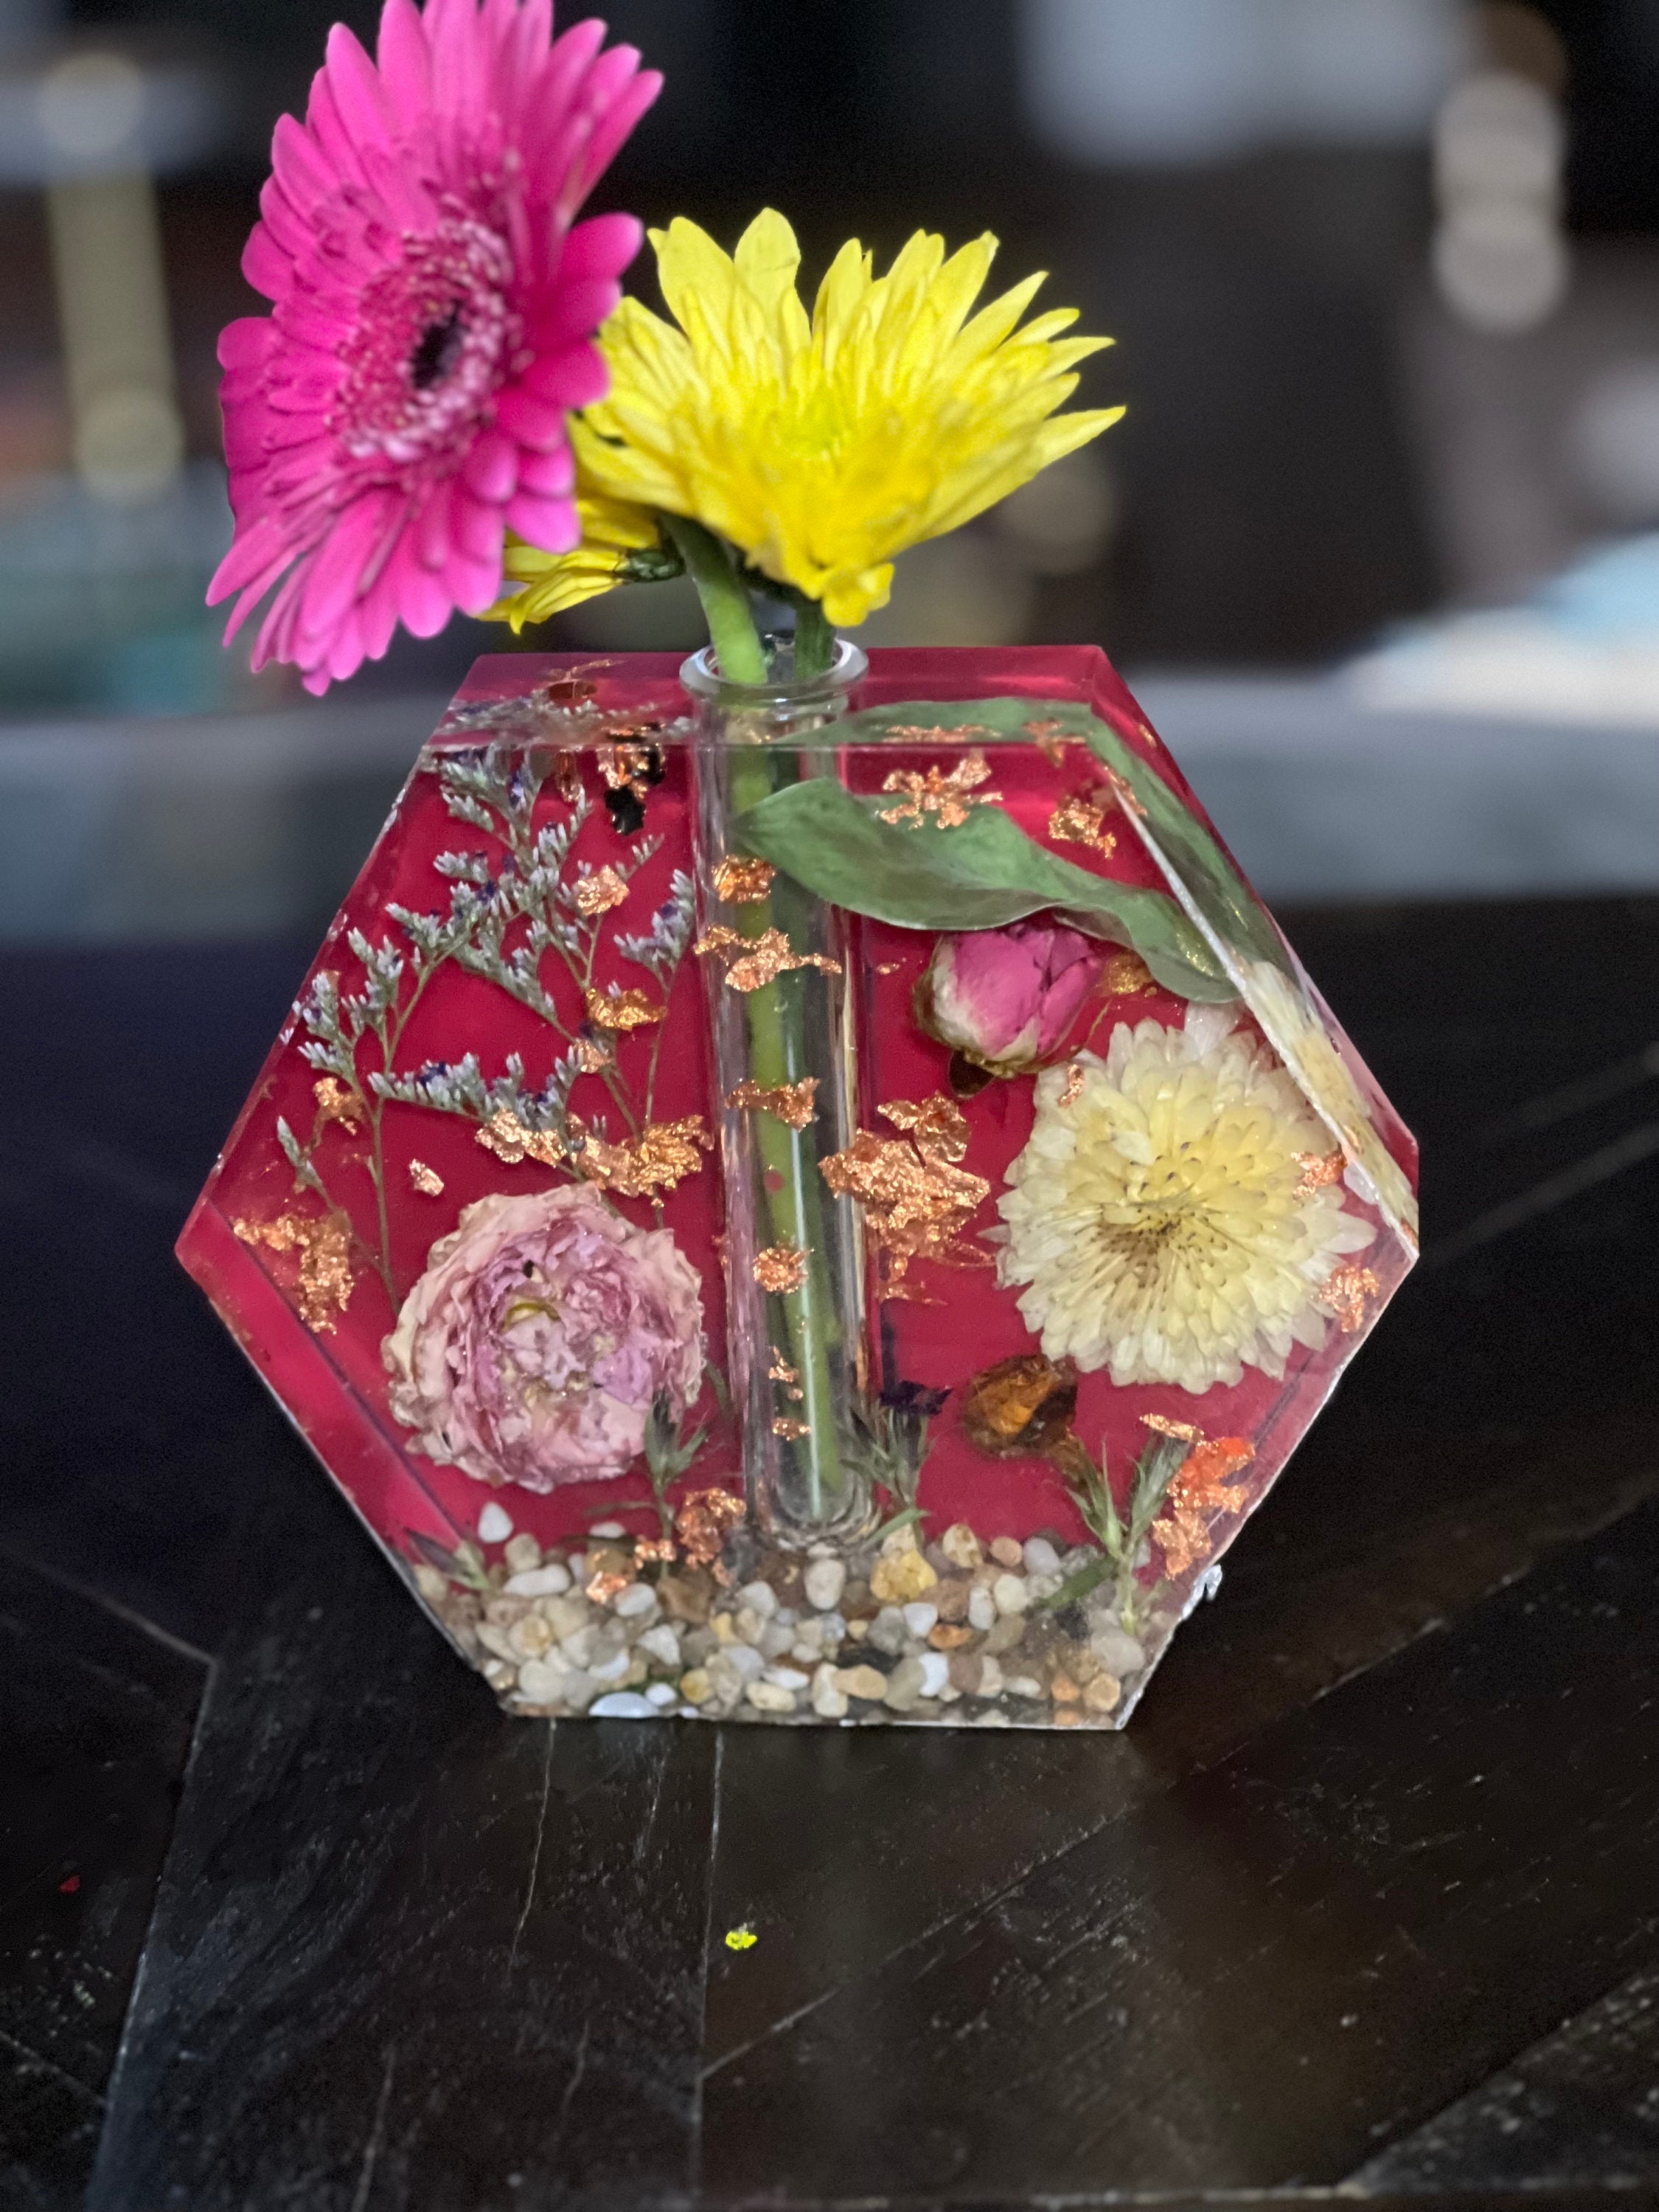 Charming Resin Vase with Flower Hairdo and Art Ornaments Storage Box –  DormVibes